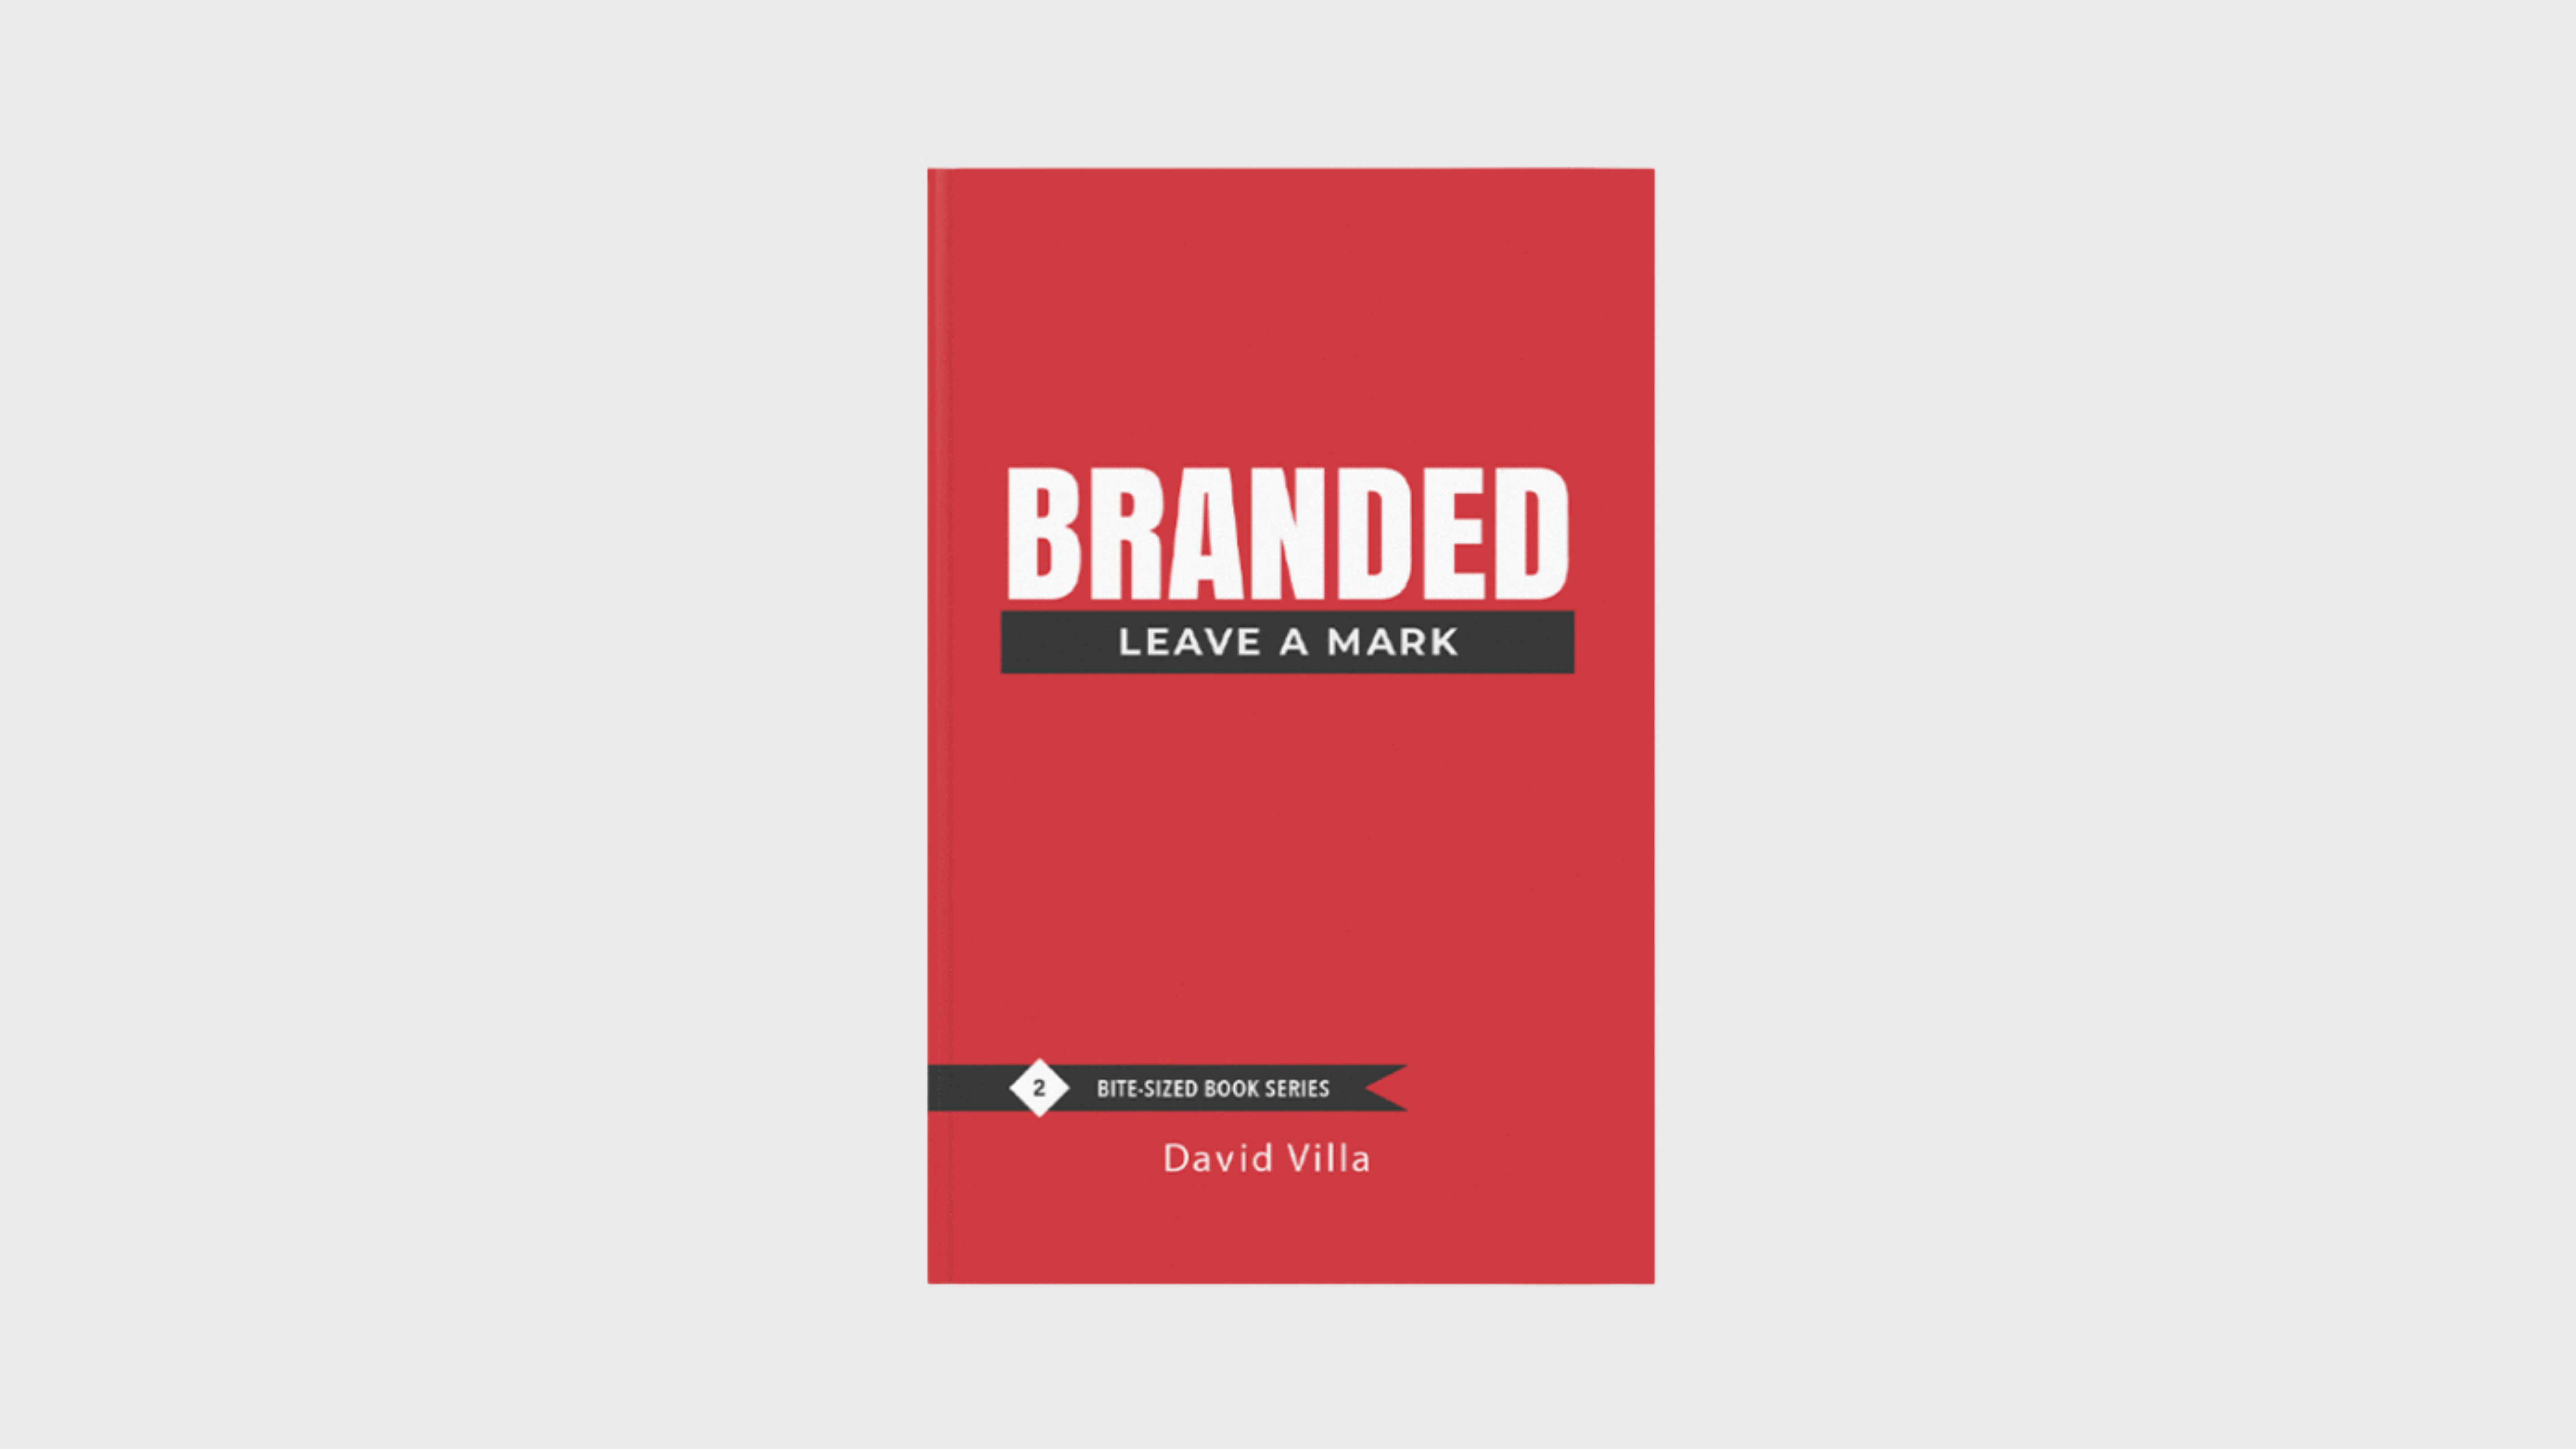 Branded: Leave a Mark - Increase Marketplace Powered by Imperial Distr. Co., Inc.